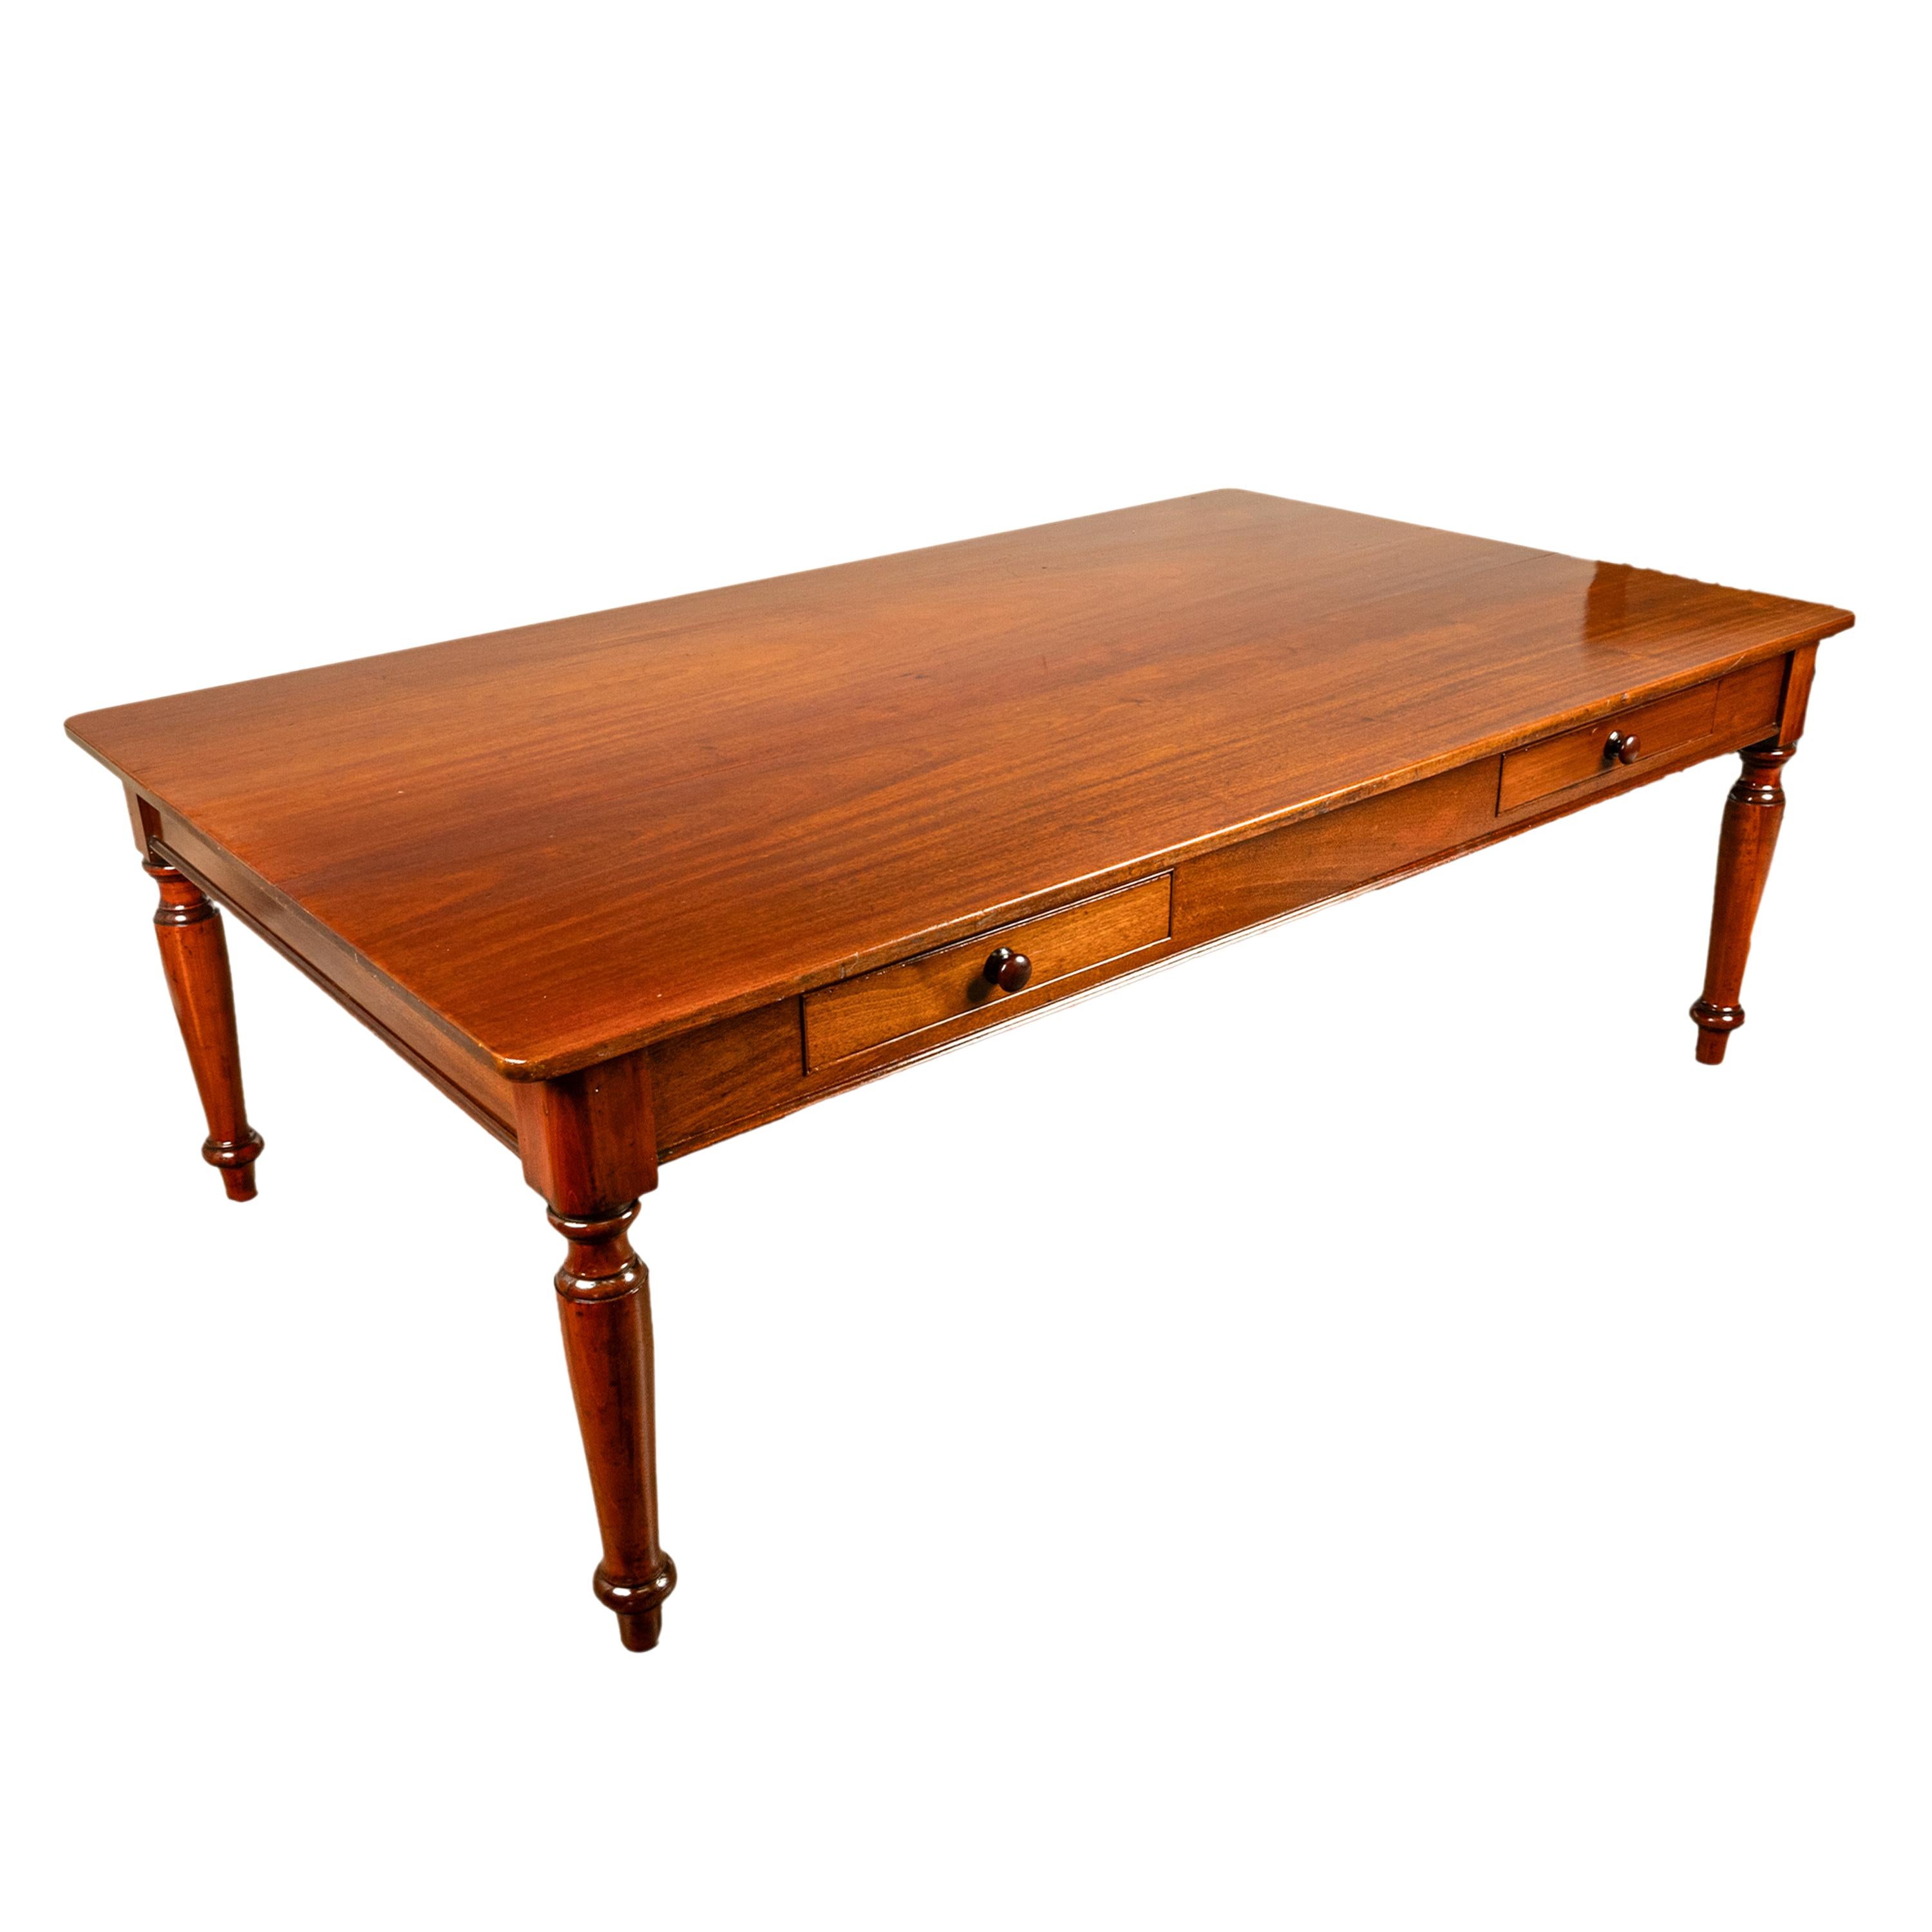 Antique Monumental 19th Century Mahogany Library Conference Dining Table 1860 In Good Condition For Sale In Portland, OR